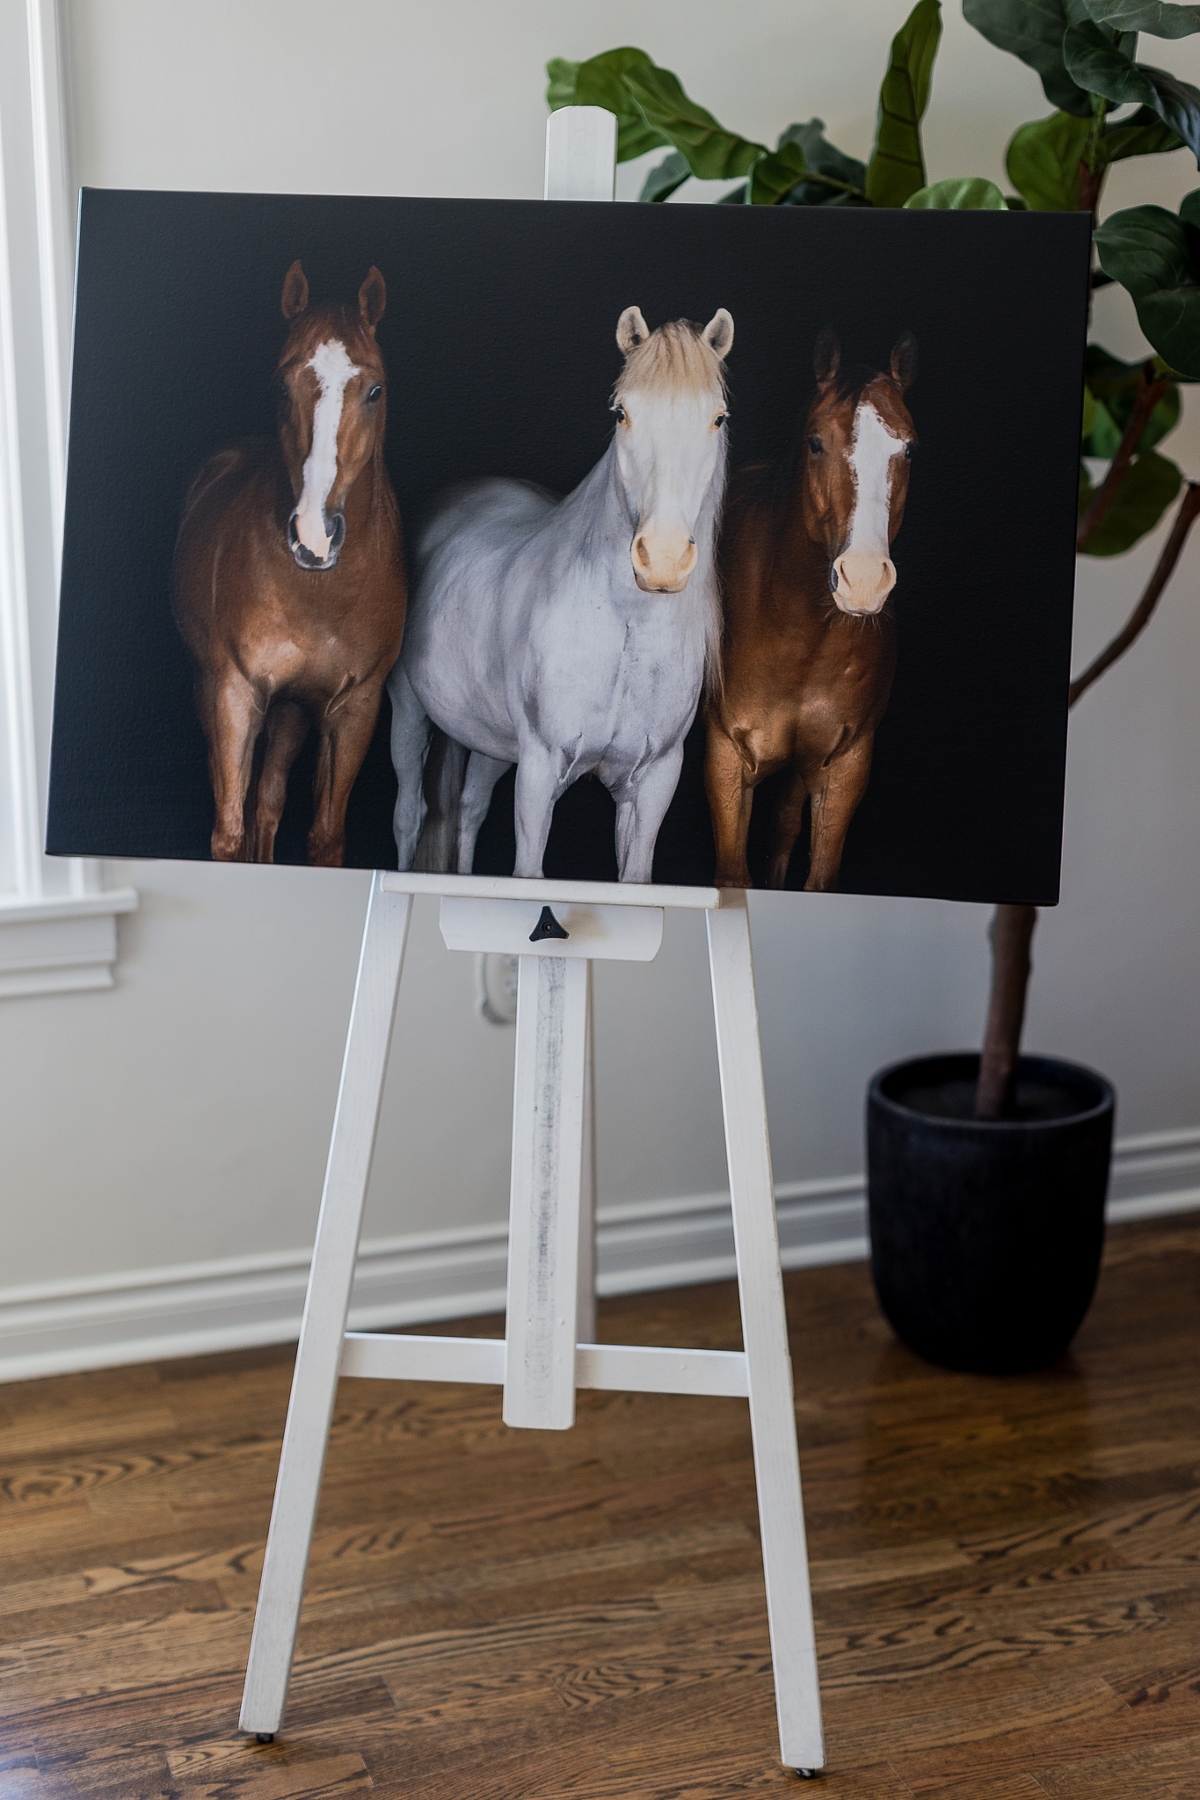 A painting of three horses displayed on a white easel, with a potted plant in the background.